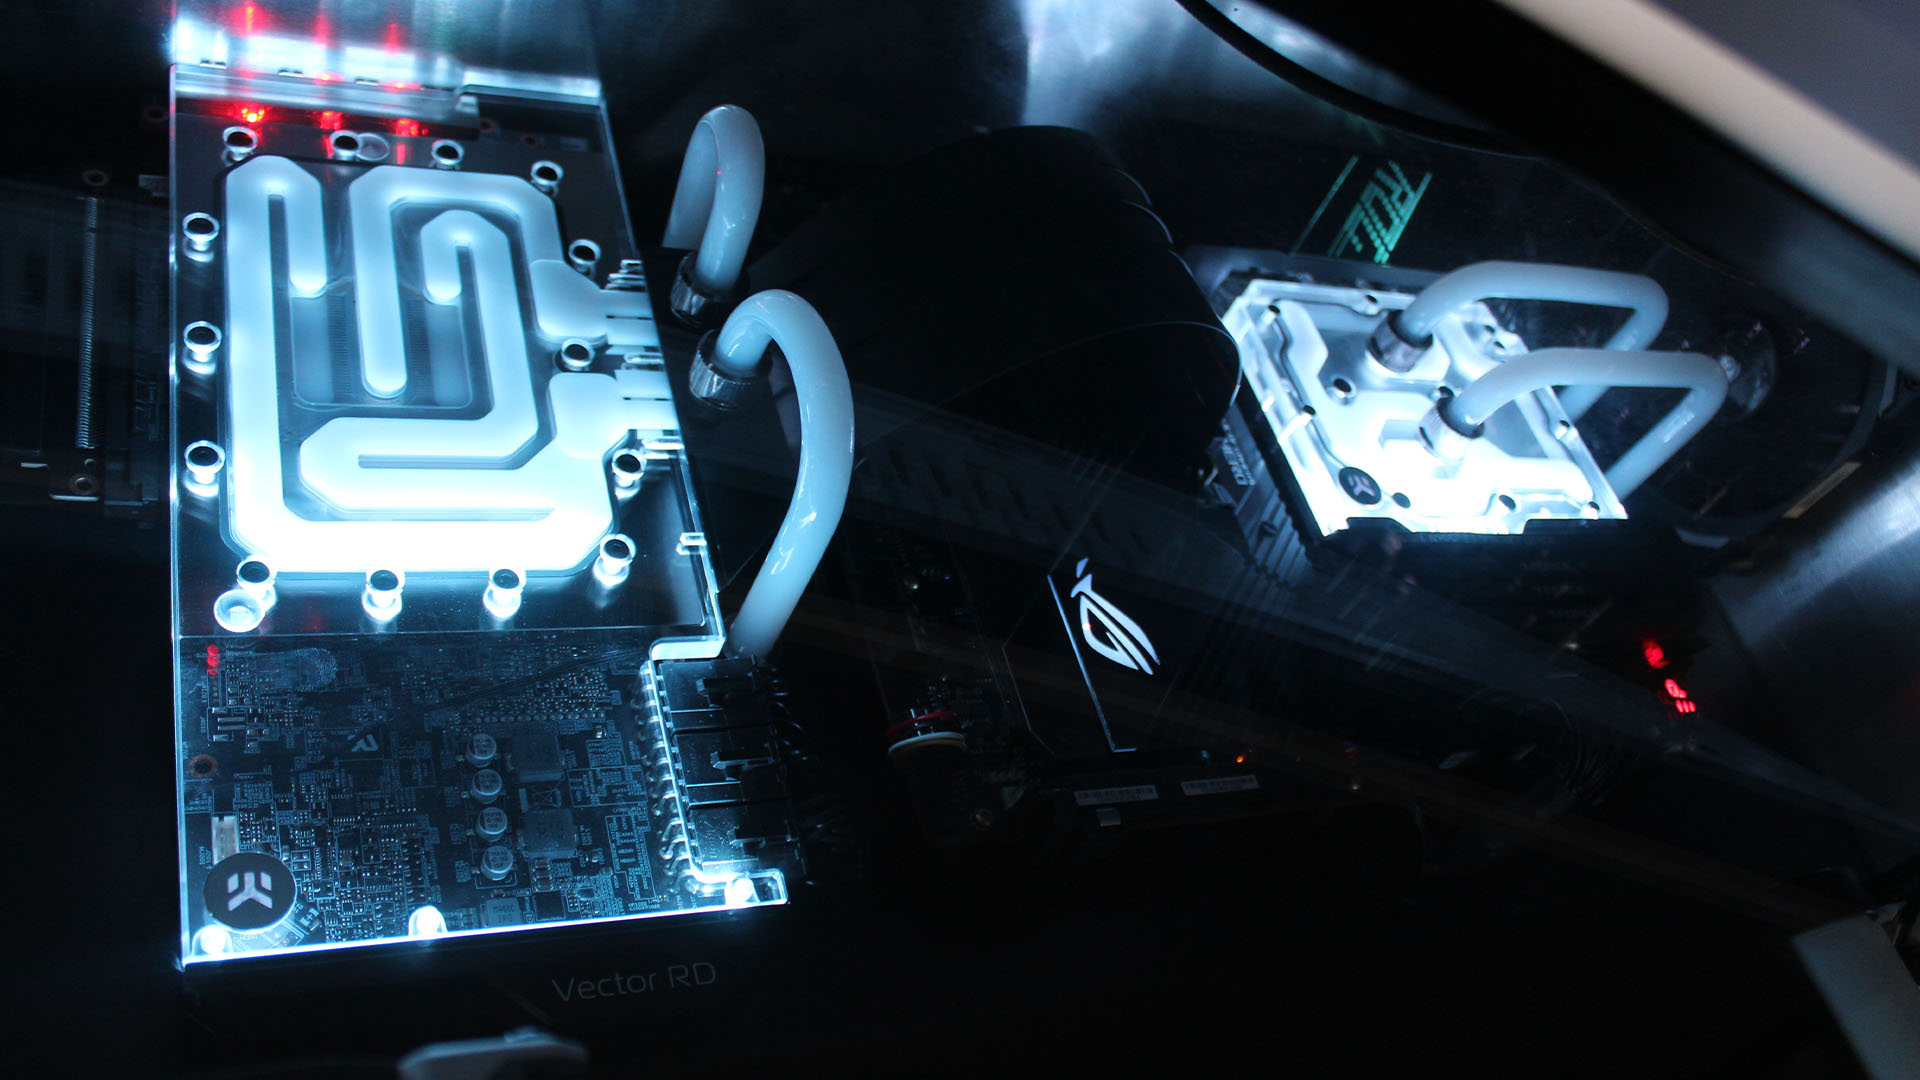 The water-cooling unit in the desk PC